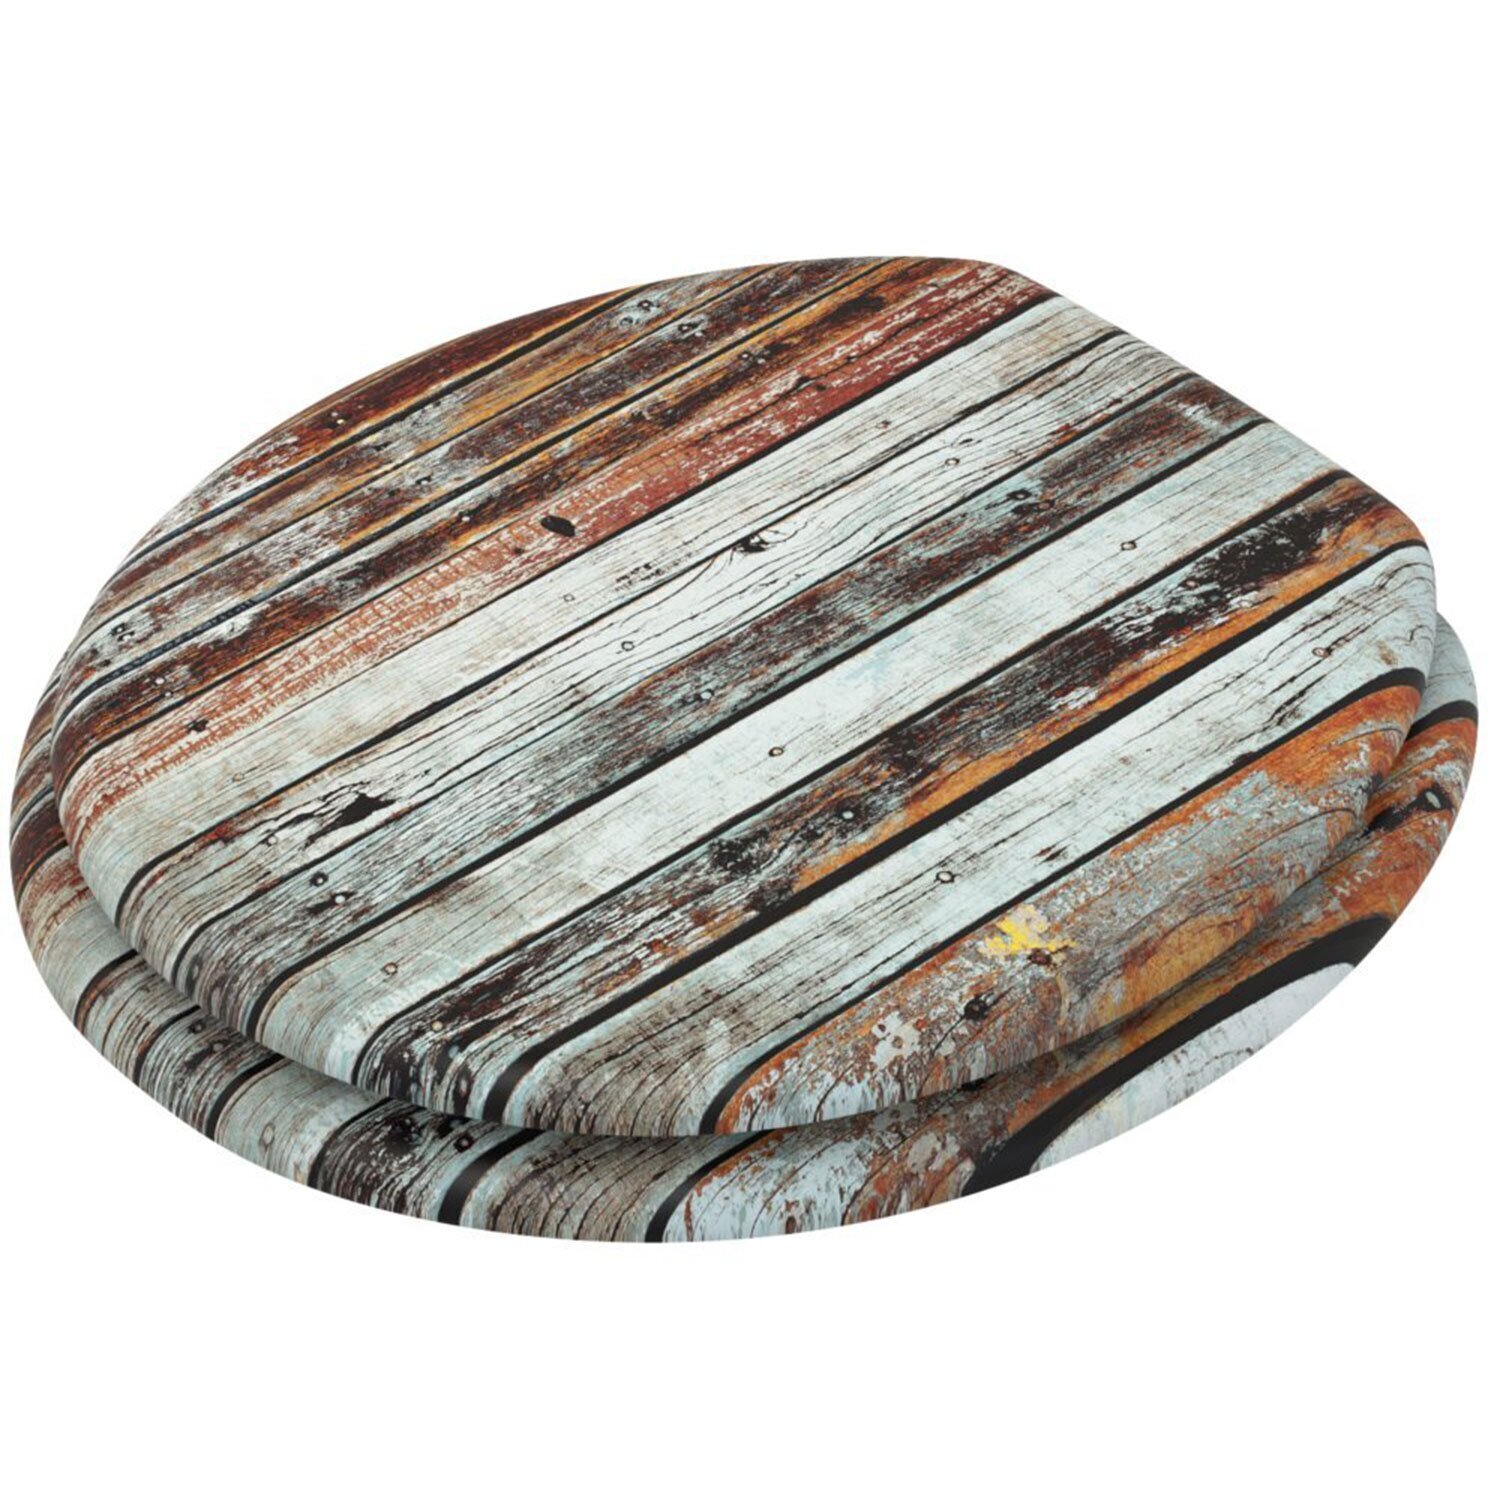 Antique Wood Planked Beadboard Imagery